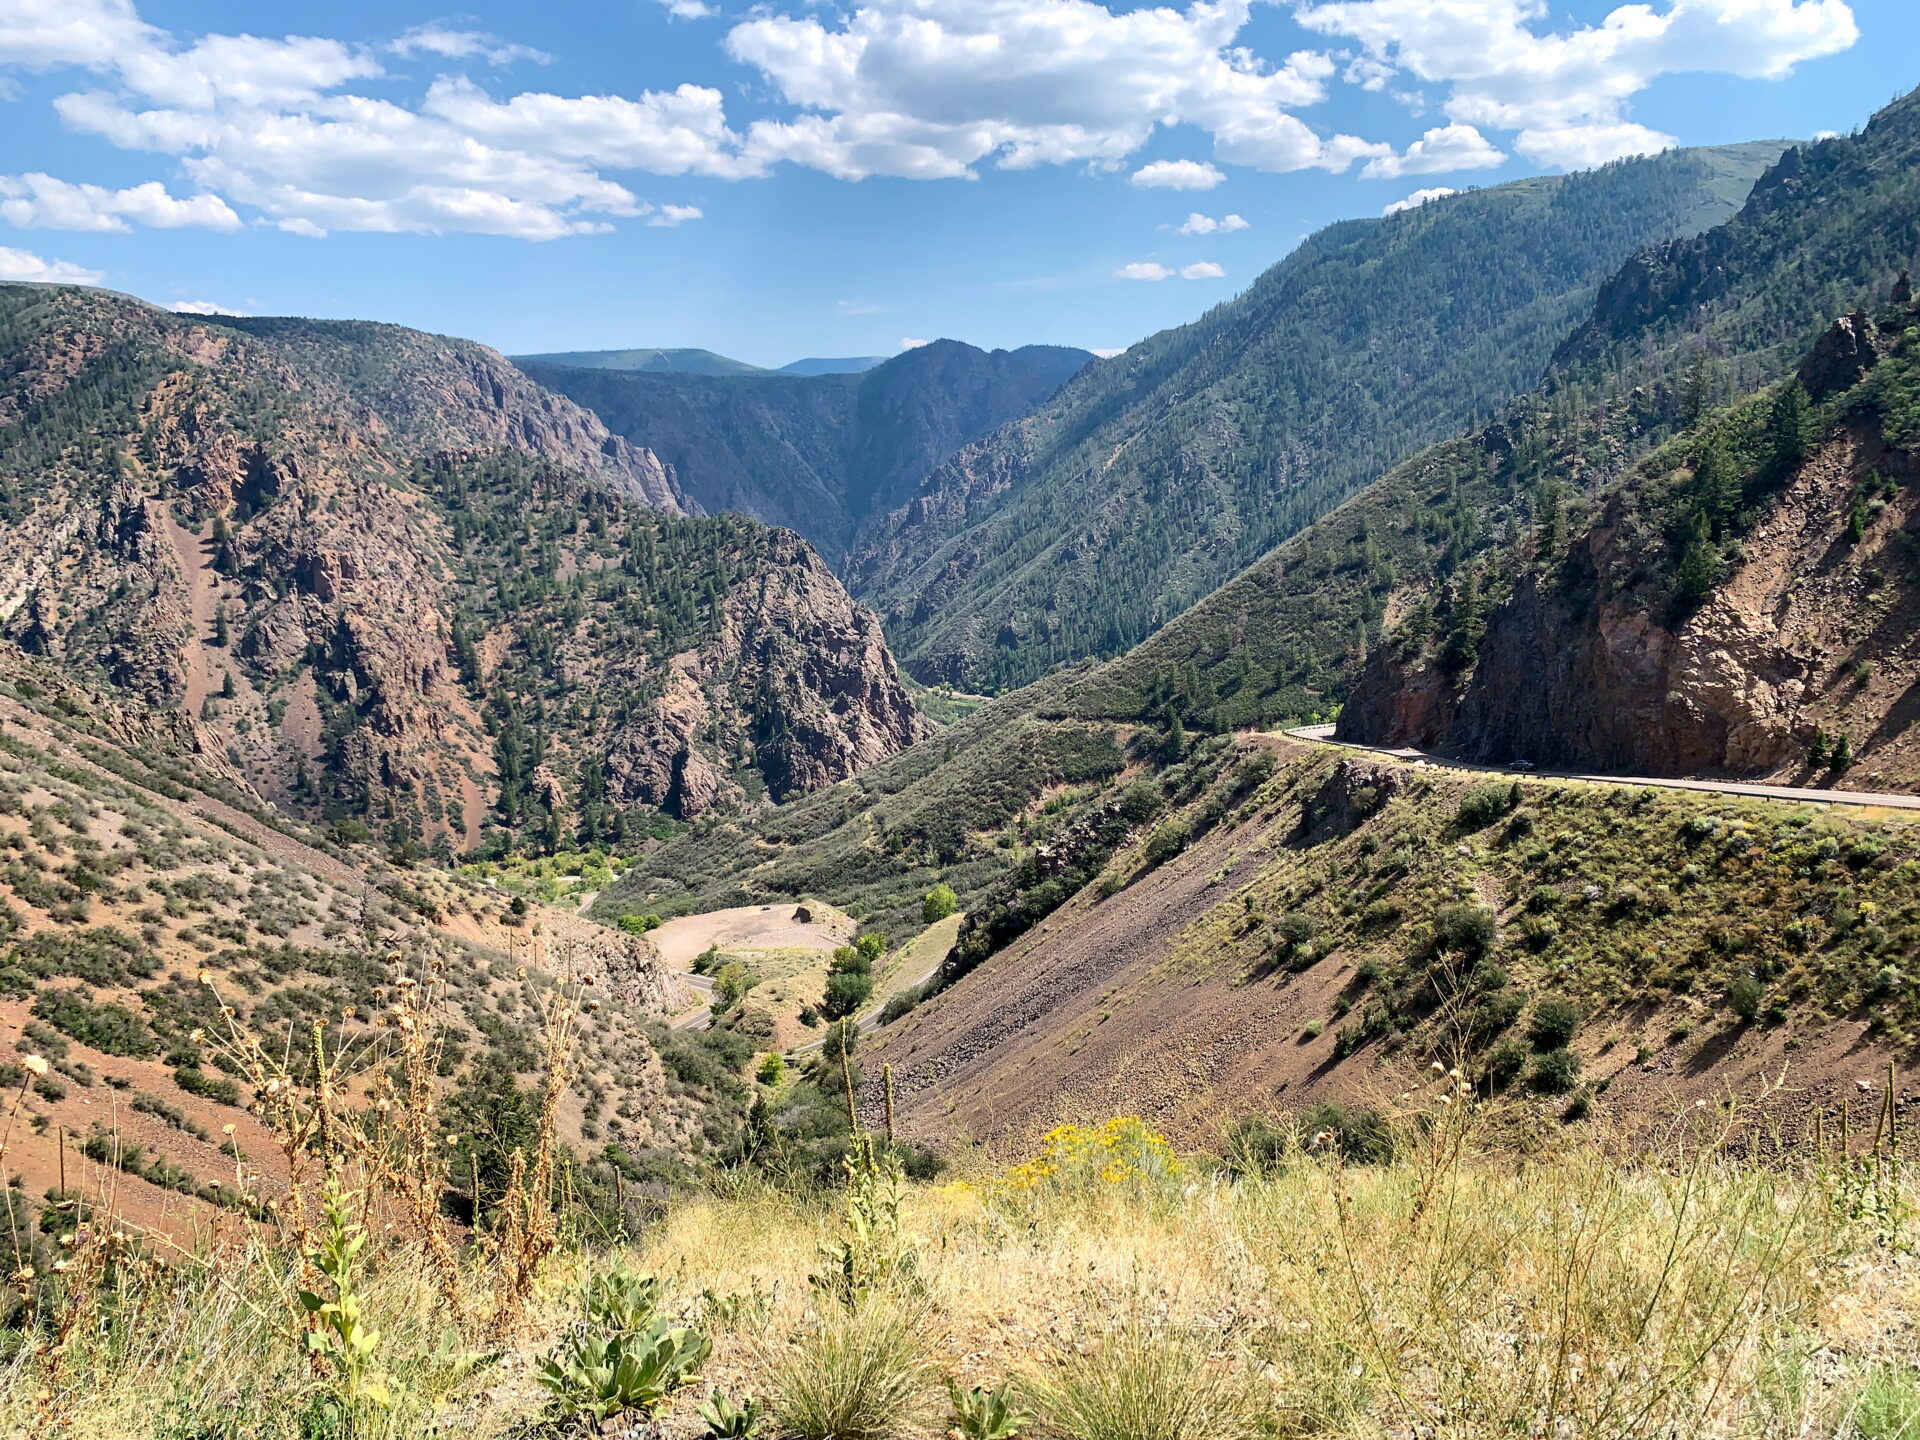 5 Fun Things to Do at Black Canyon of the Gunnison National Park